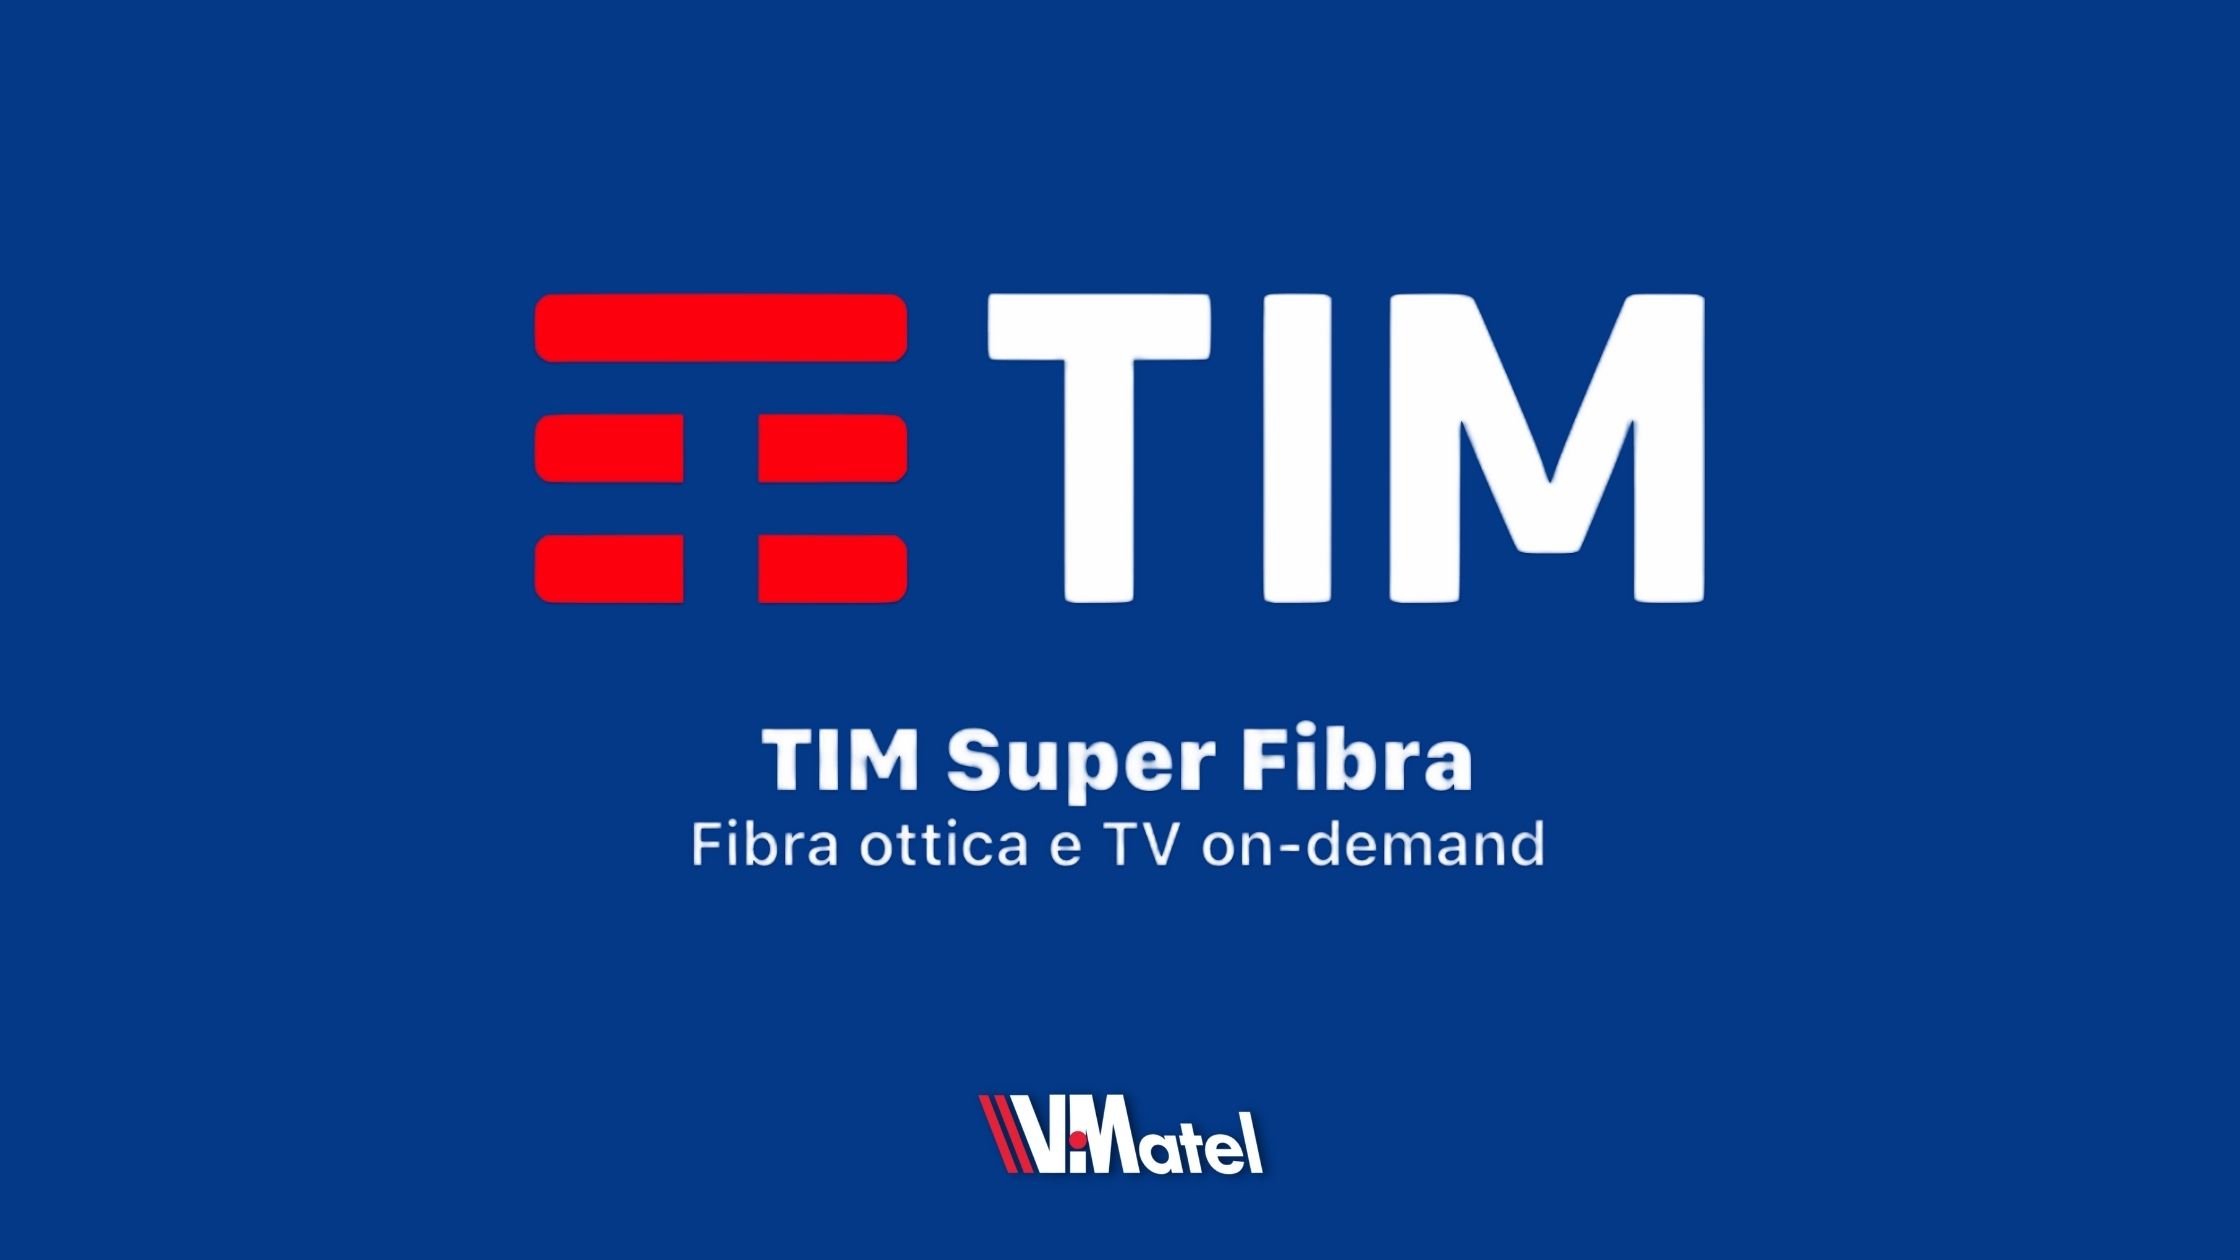 Tim Super Fibra: the best offer for your home